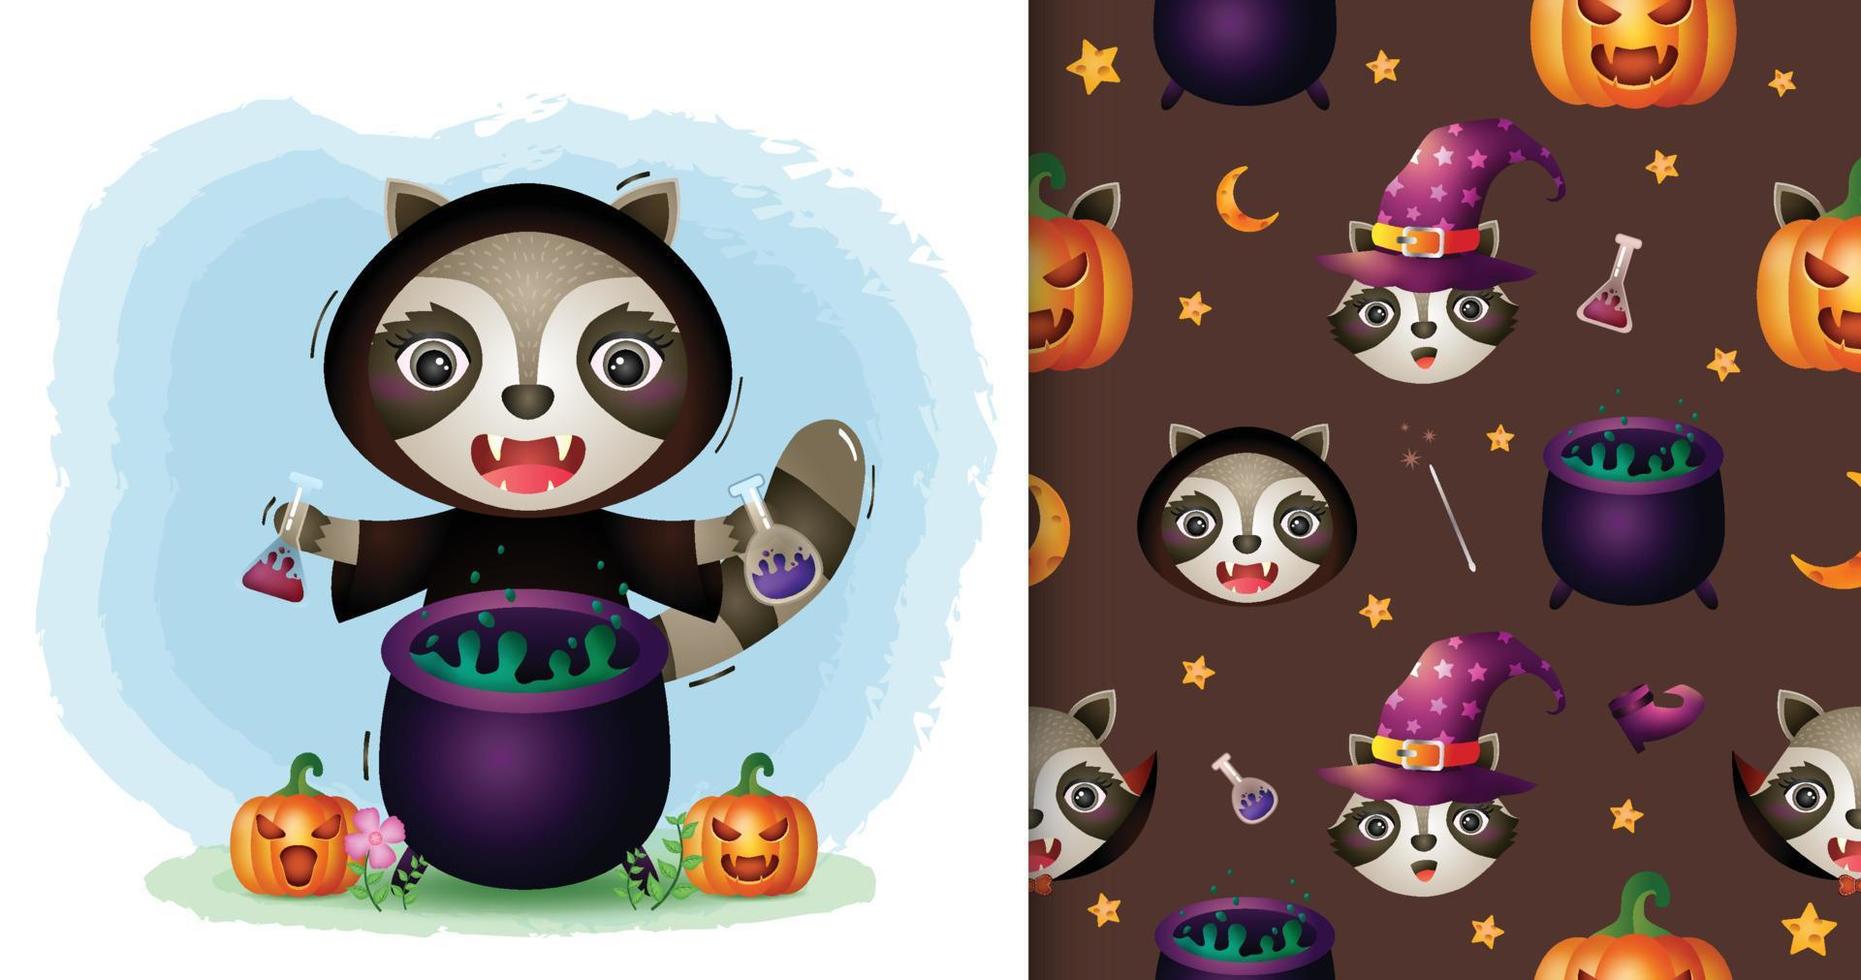 a cute raccoon with witch costume halloween character collection. seamless pattern and illustration designs vector